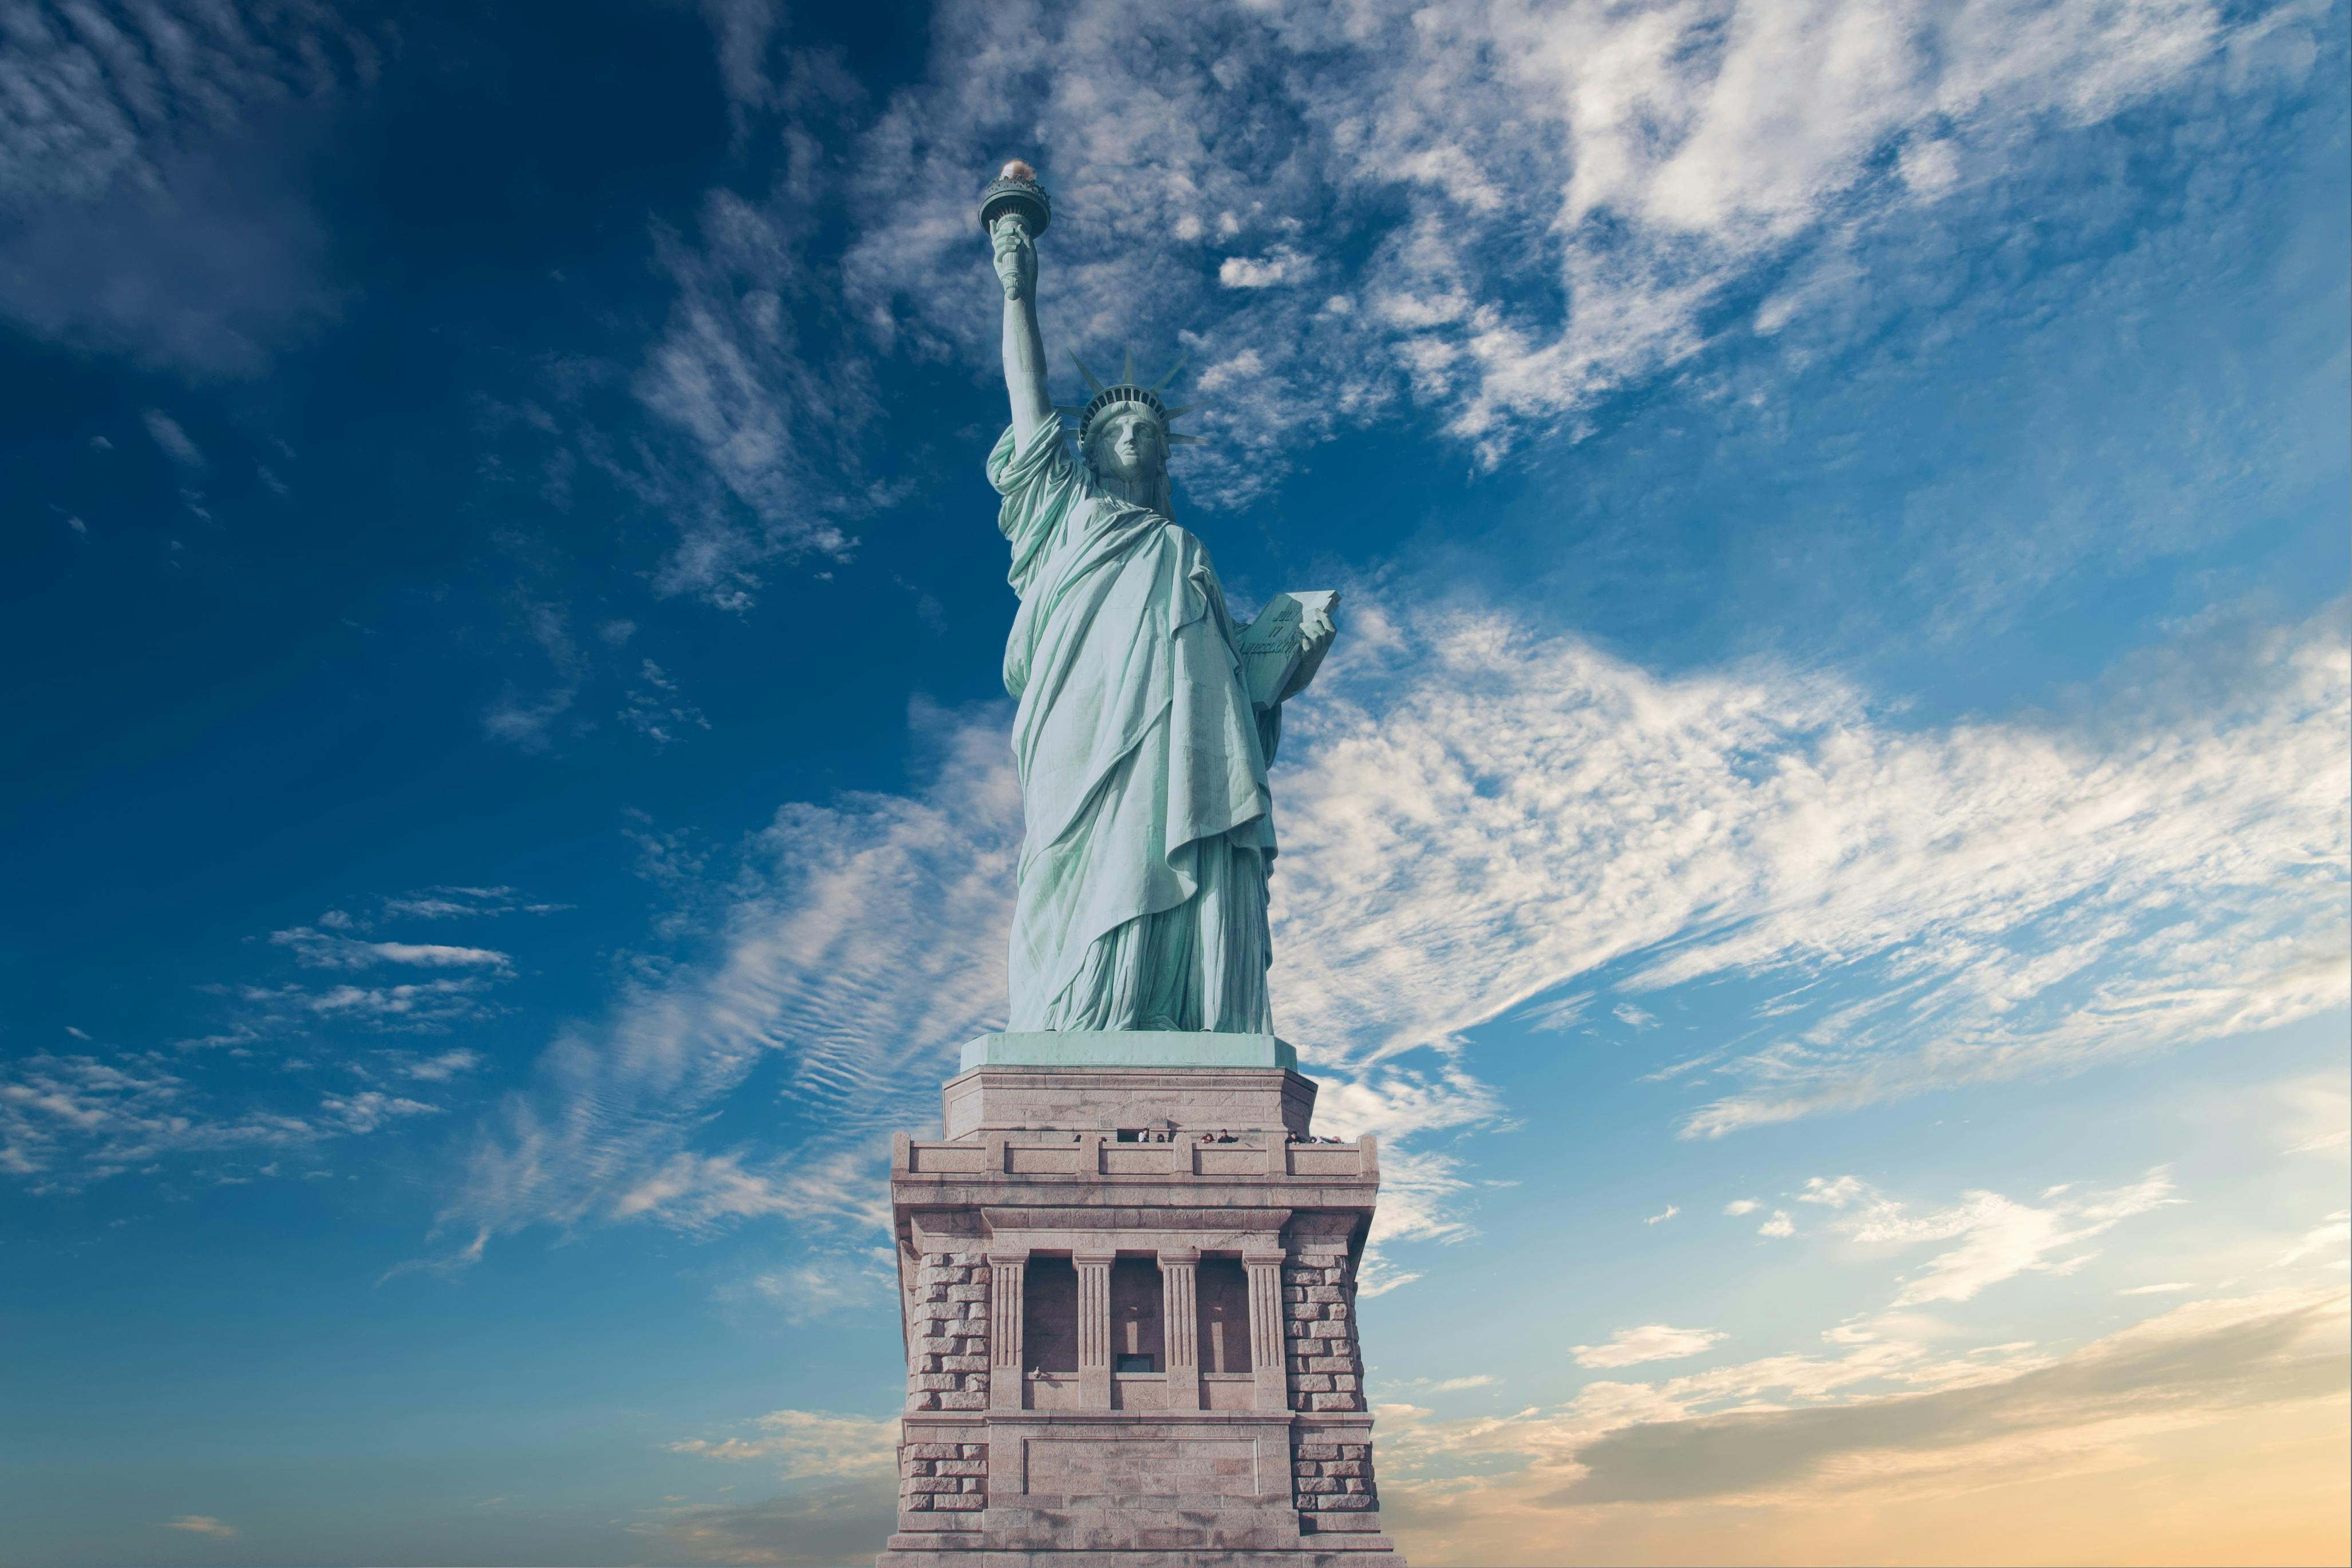 New Yorks Statue of Liberty Wallpapers  HD Wallpapers  ID 10283